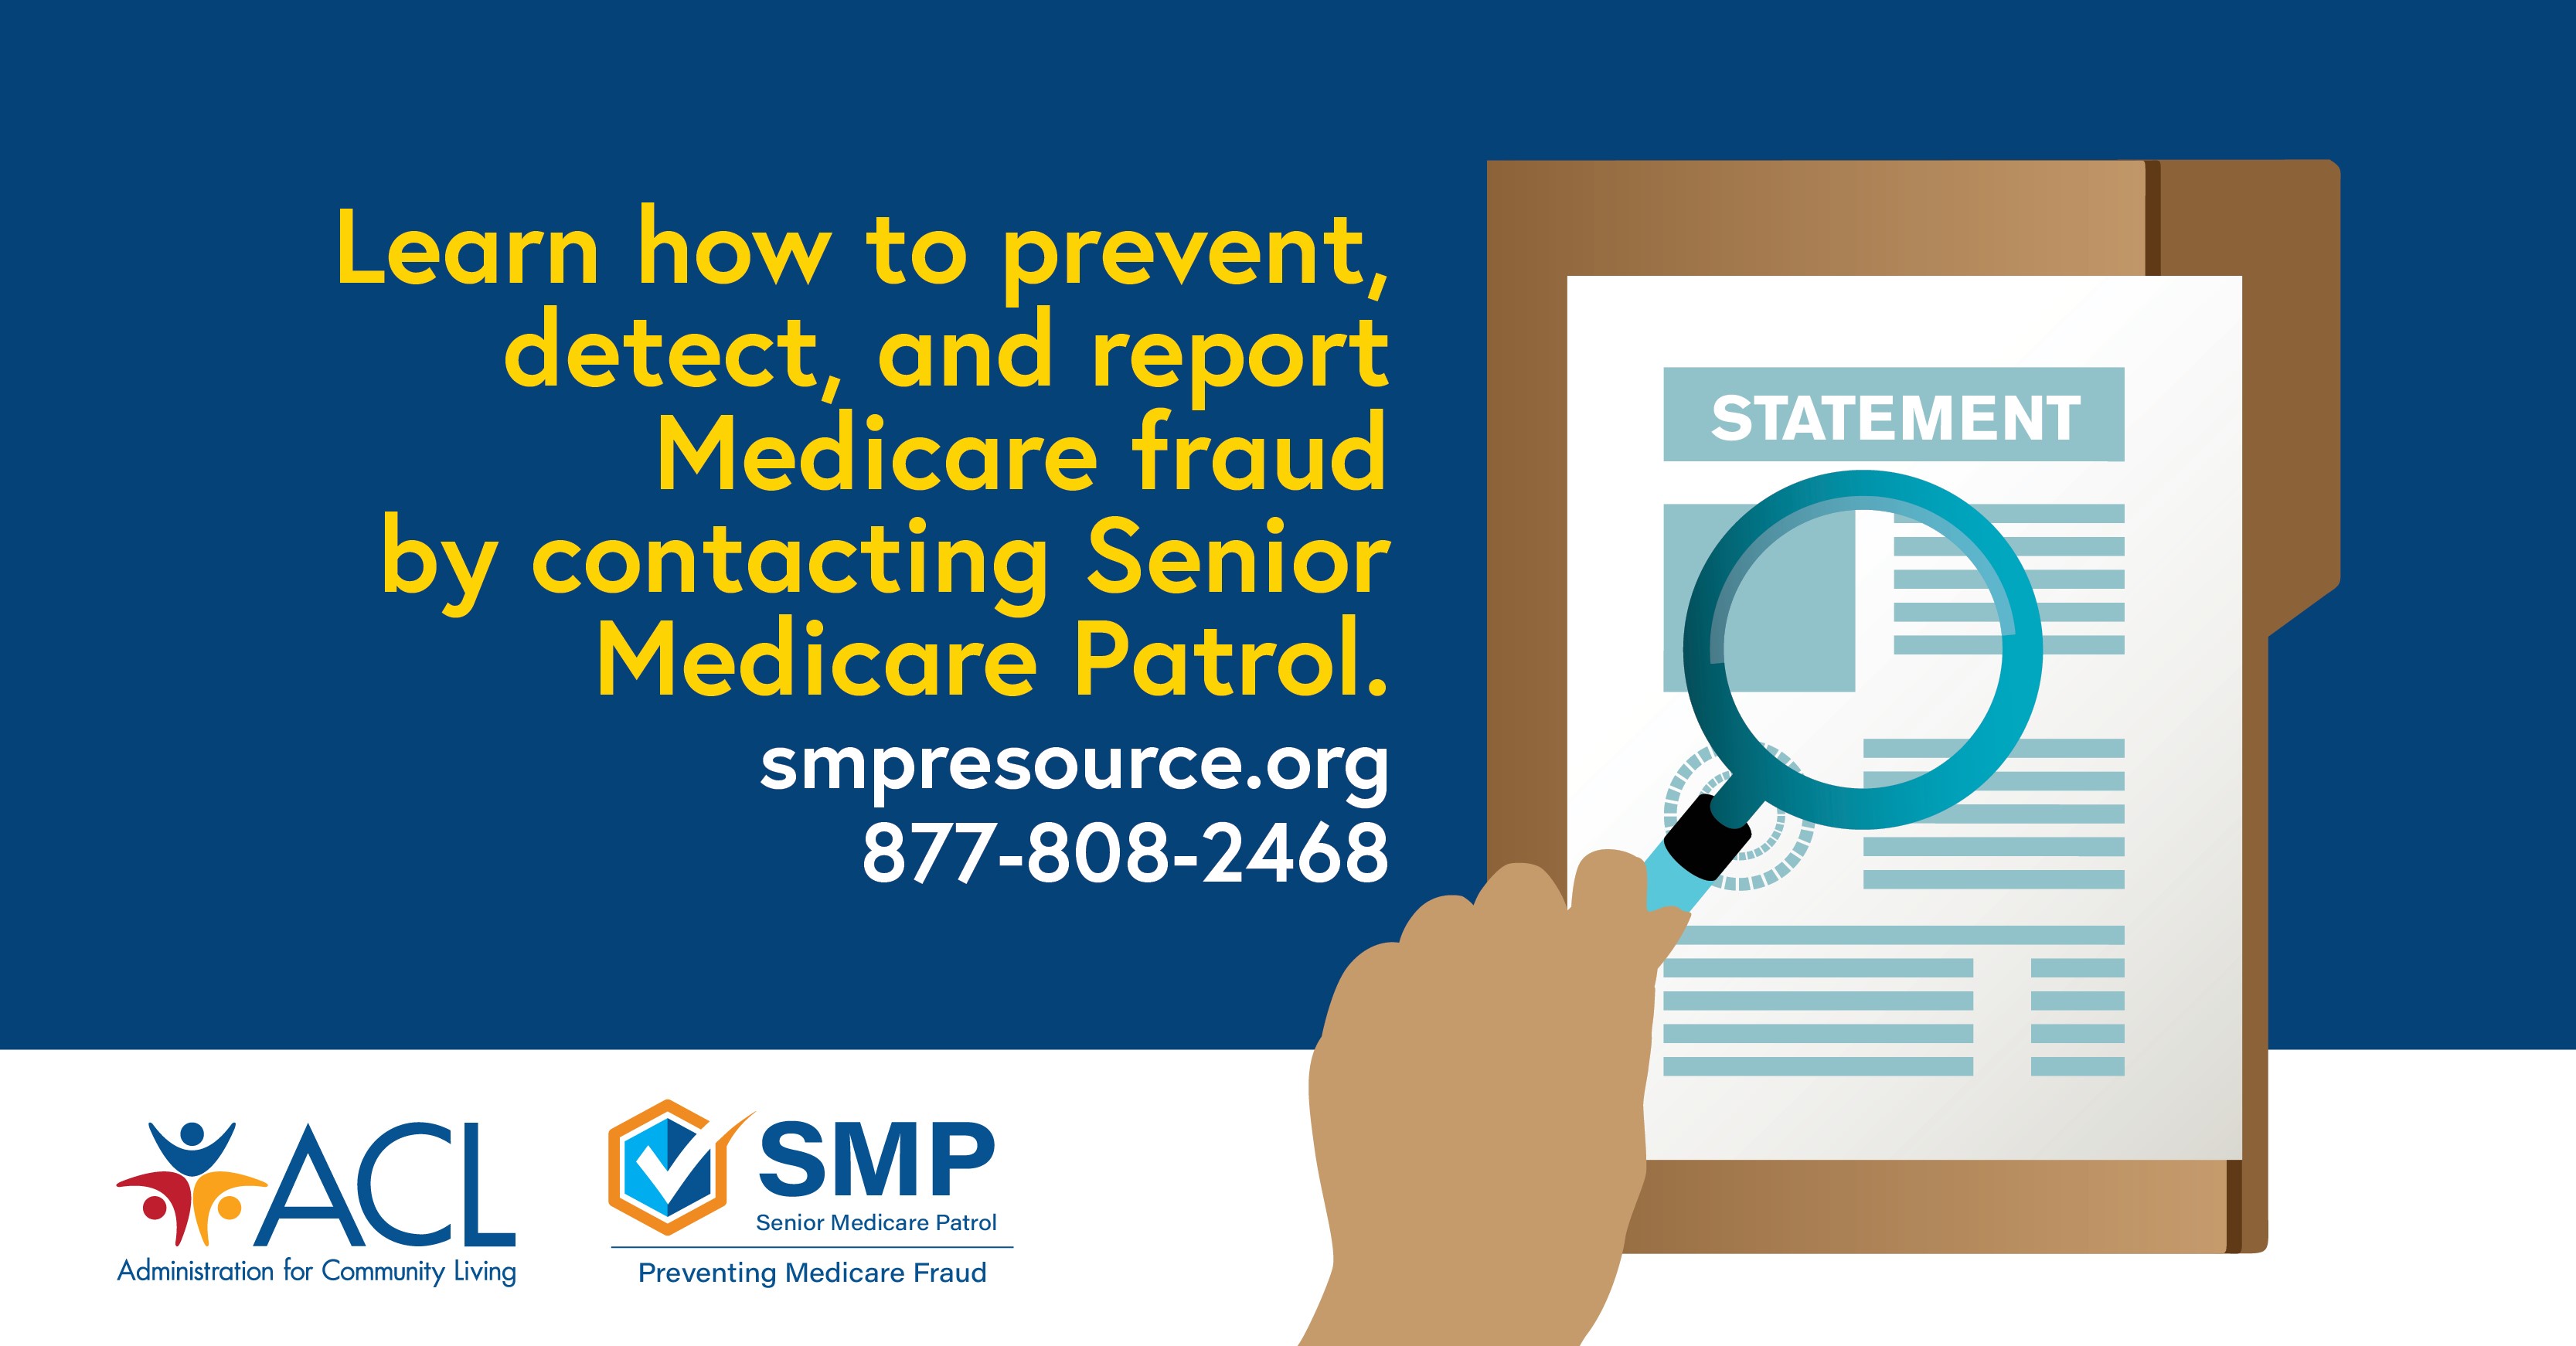 Learn how to prevent, detect, and report Medicare fraud by contacting Senior Medicare Patrol. smpresource.org. 877-808-2468. ACL, Administration for Community Living. SMP, Senior Medicare Patrol: Preventing Medicare Fraud.